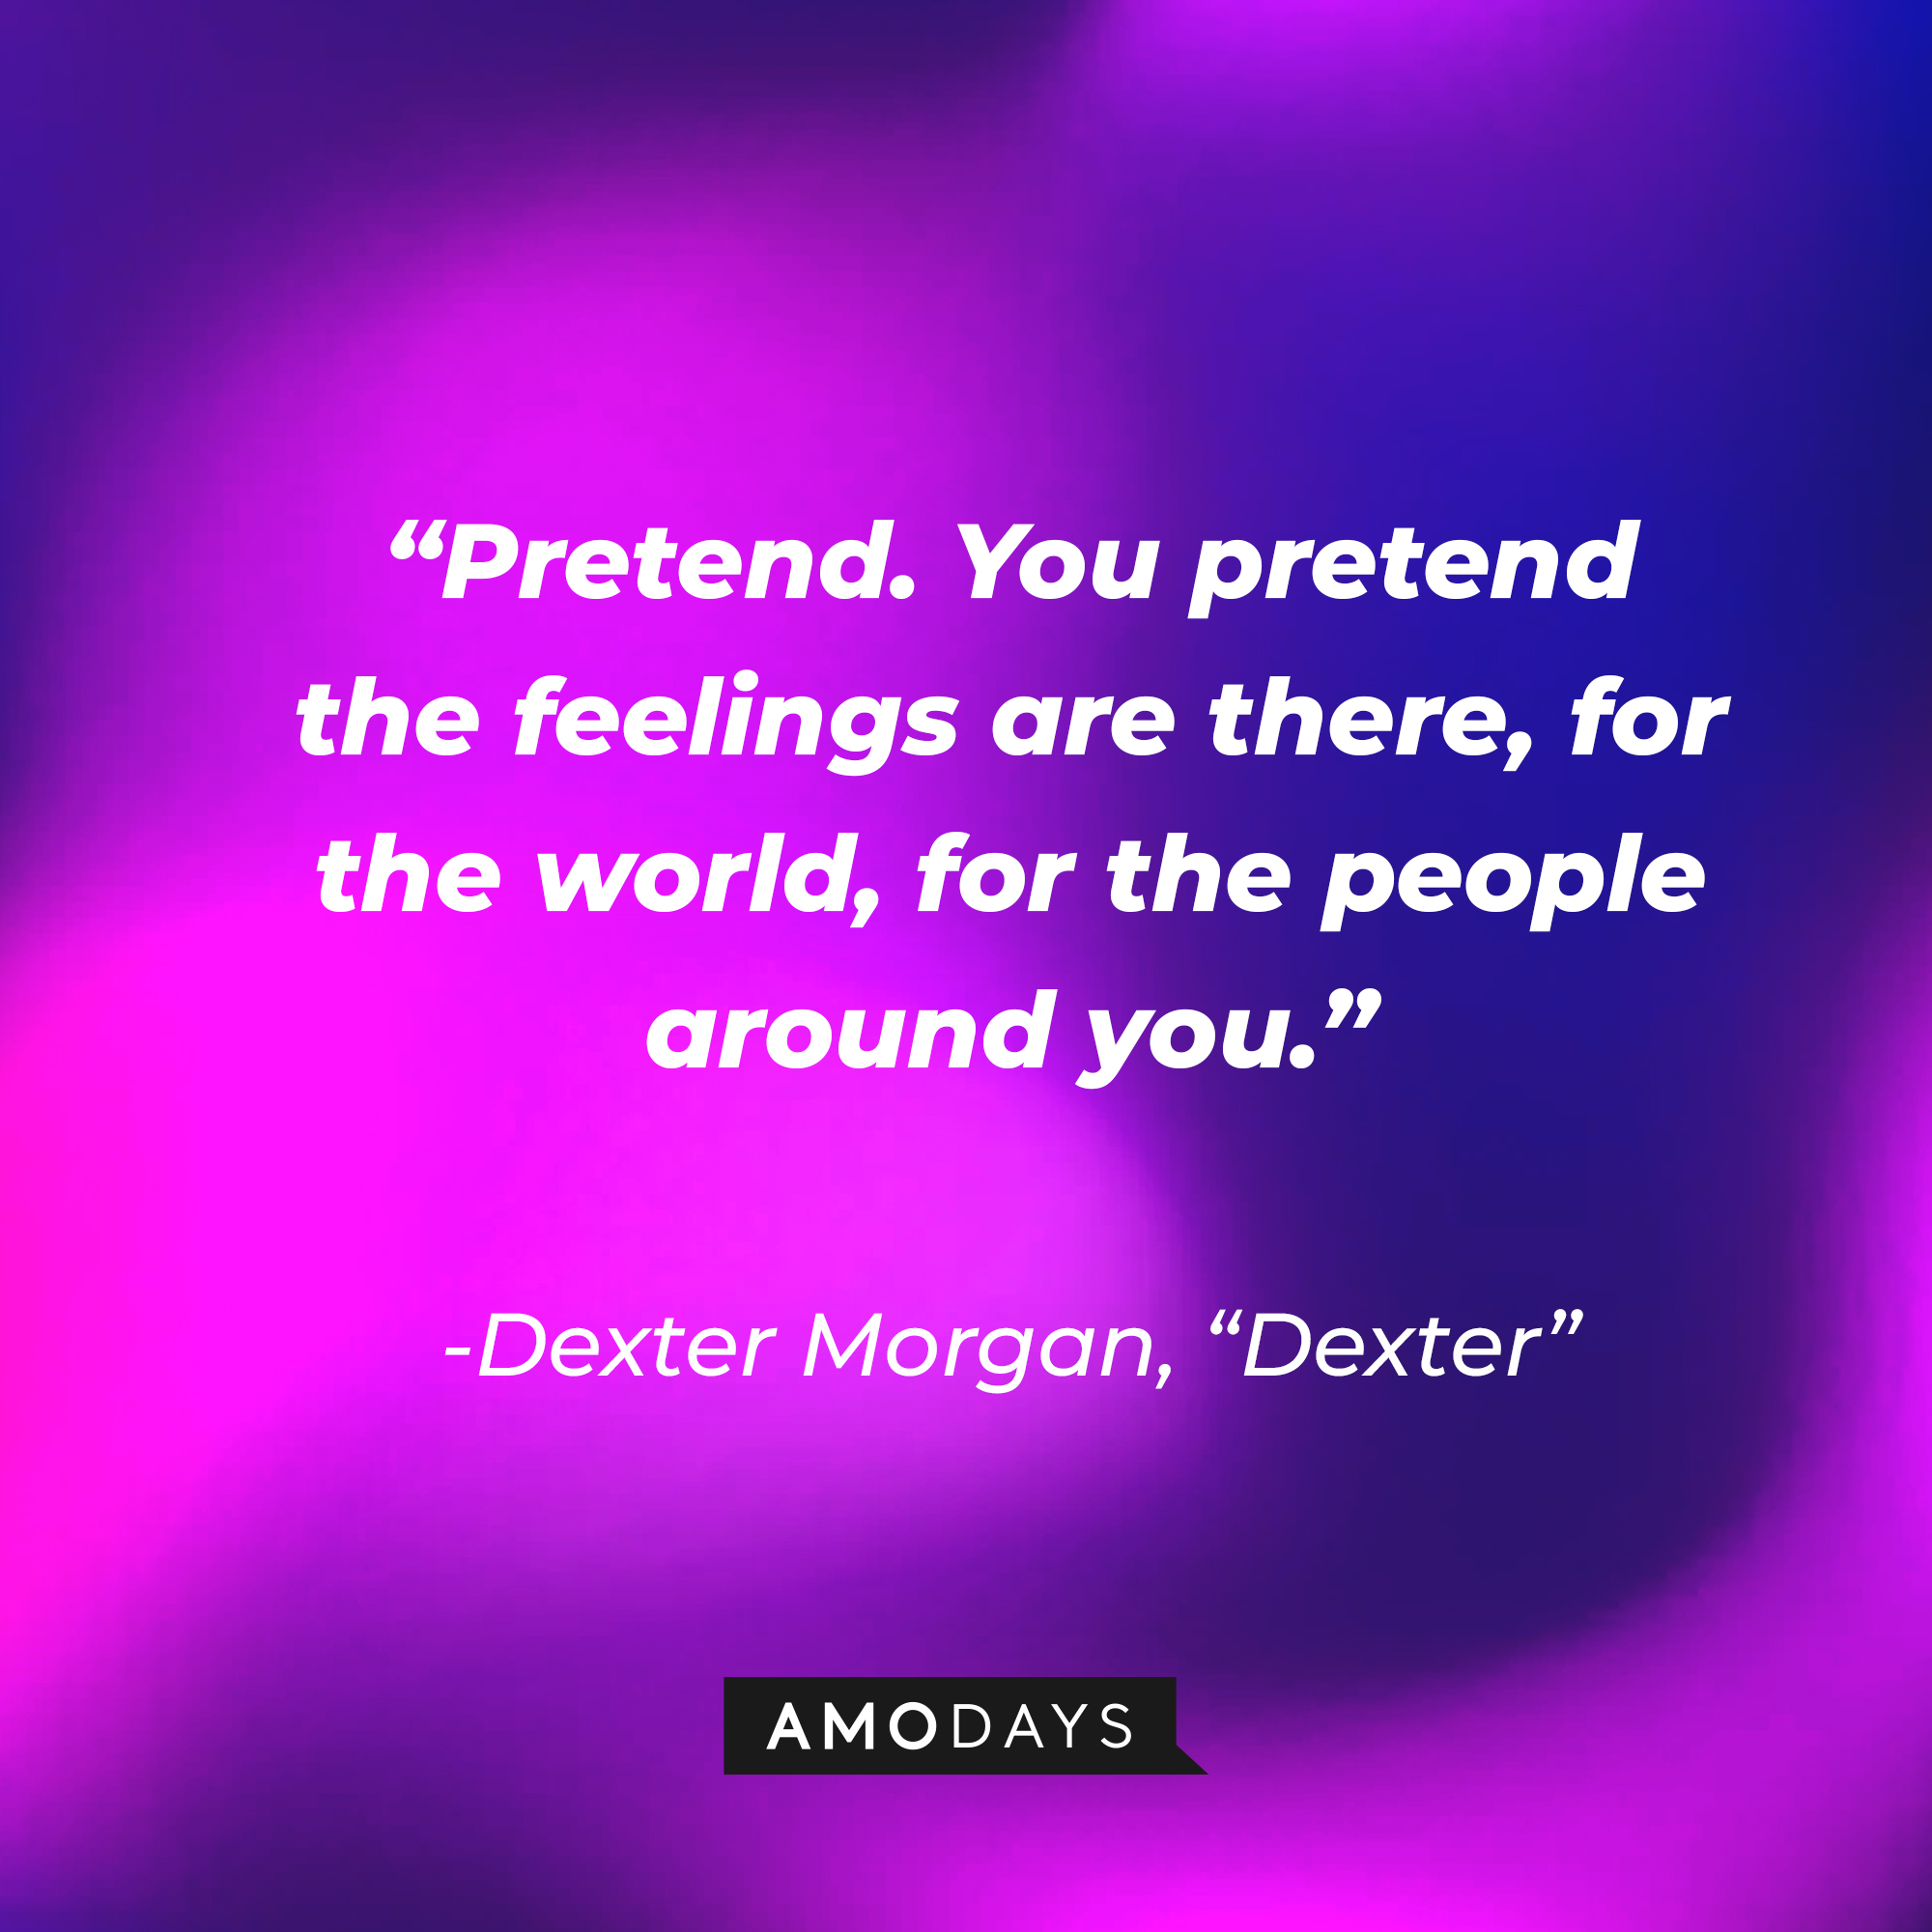 Dexter Morgan's quote from "Dexter:" “Pretend. You pretend the feelings are there, for the world, for the people around you.” | Source: AmoDays